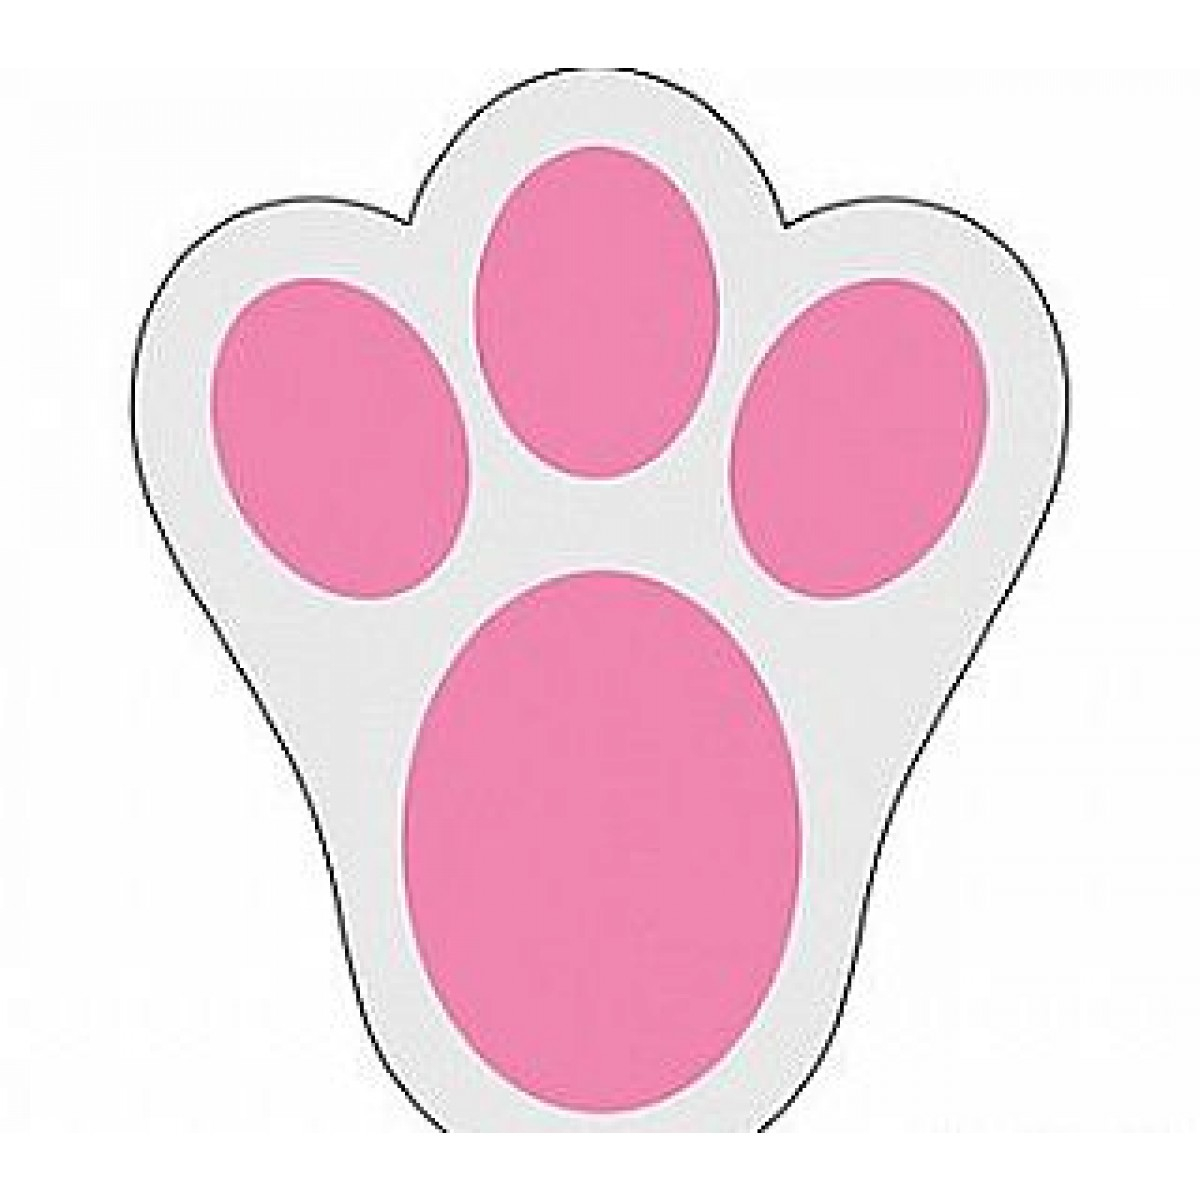 Rabbit Feet Template Bunny Paw Print Using These For Easter For The 